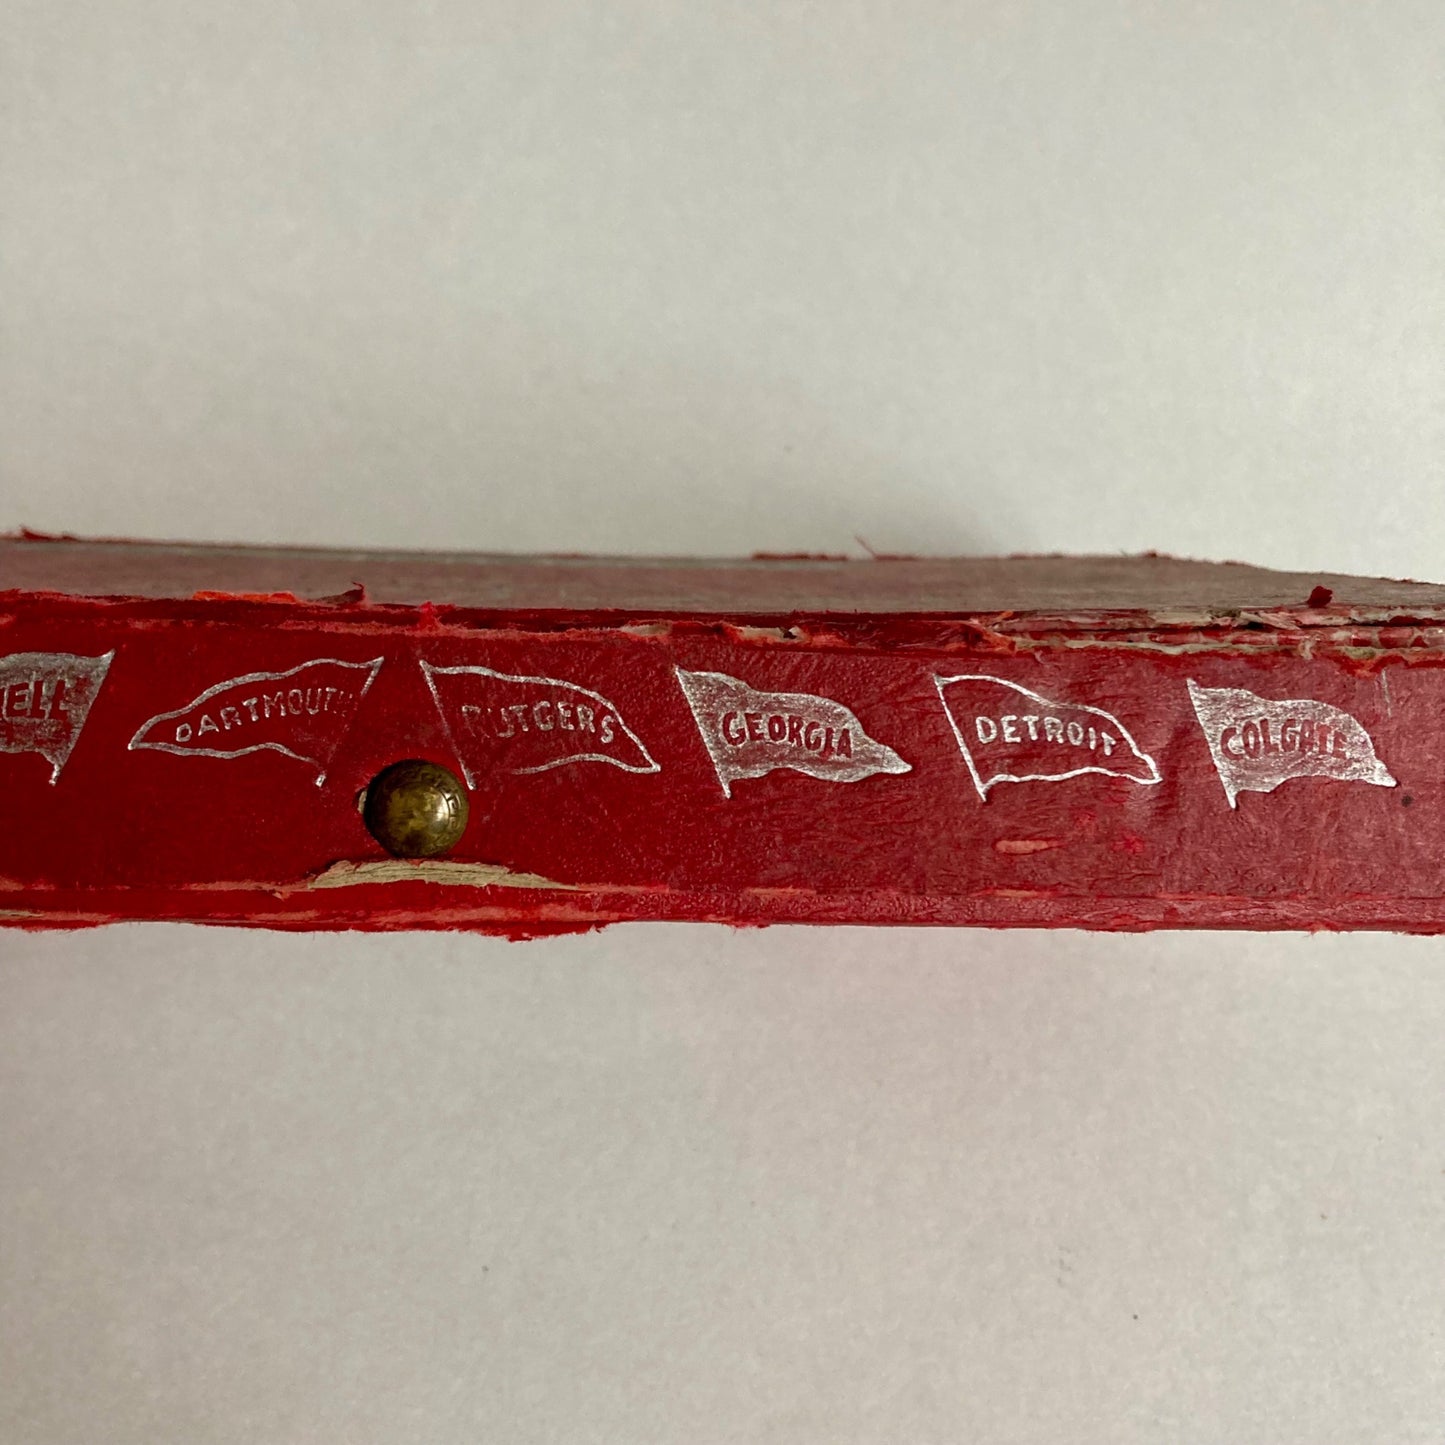 Vintage 1930's Yale Bowl All American Pencil Box RARE Ivy League Red Football